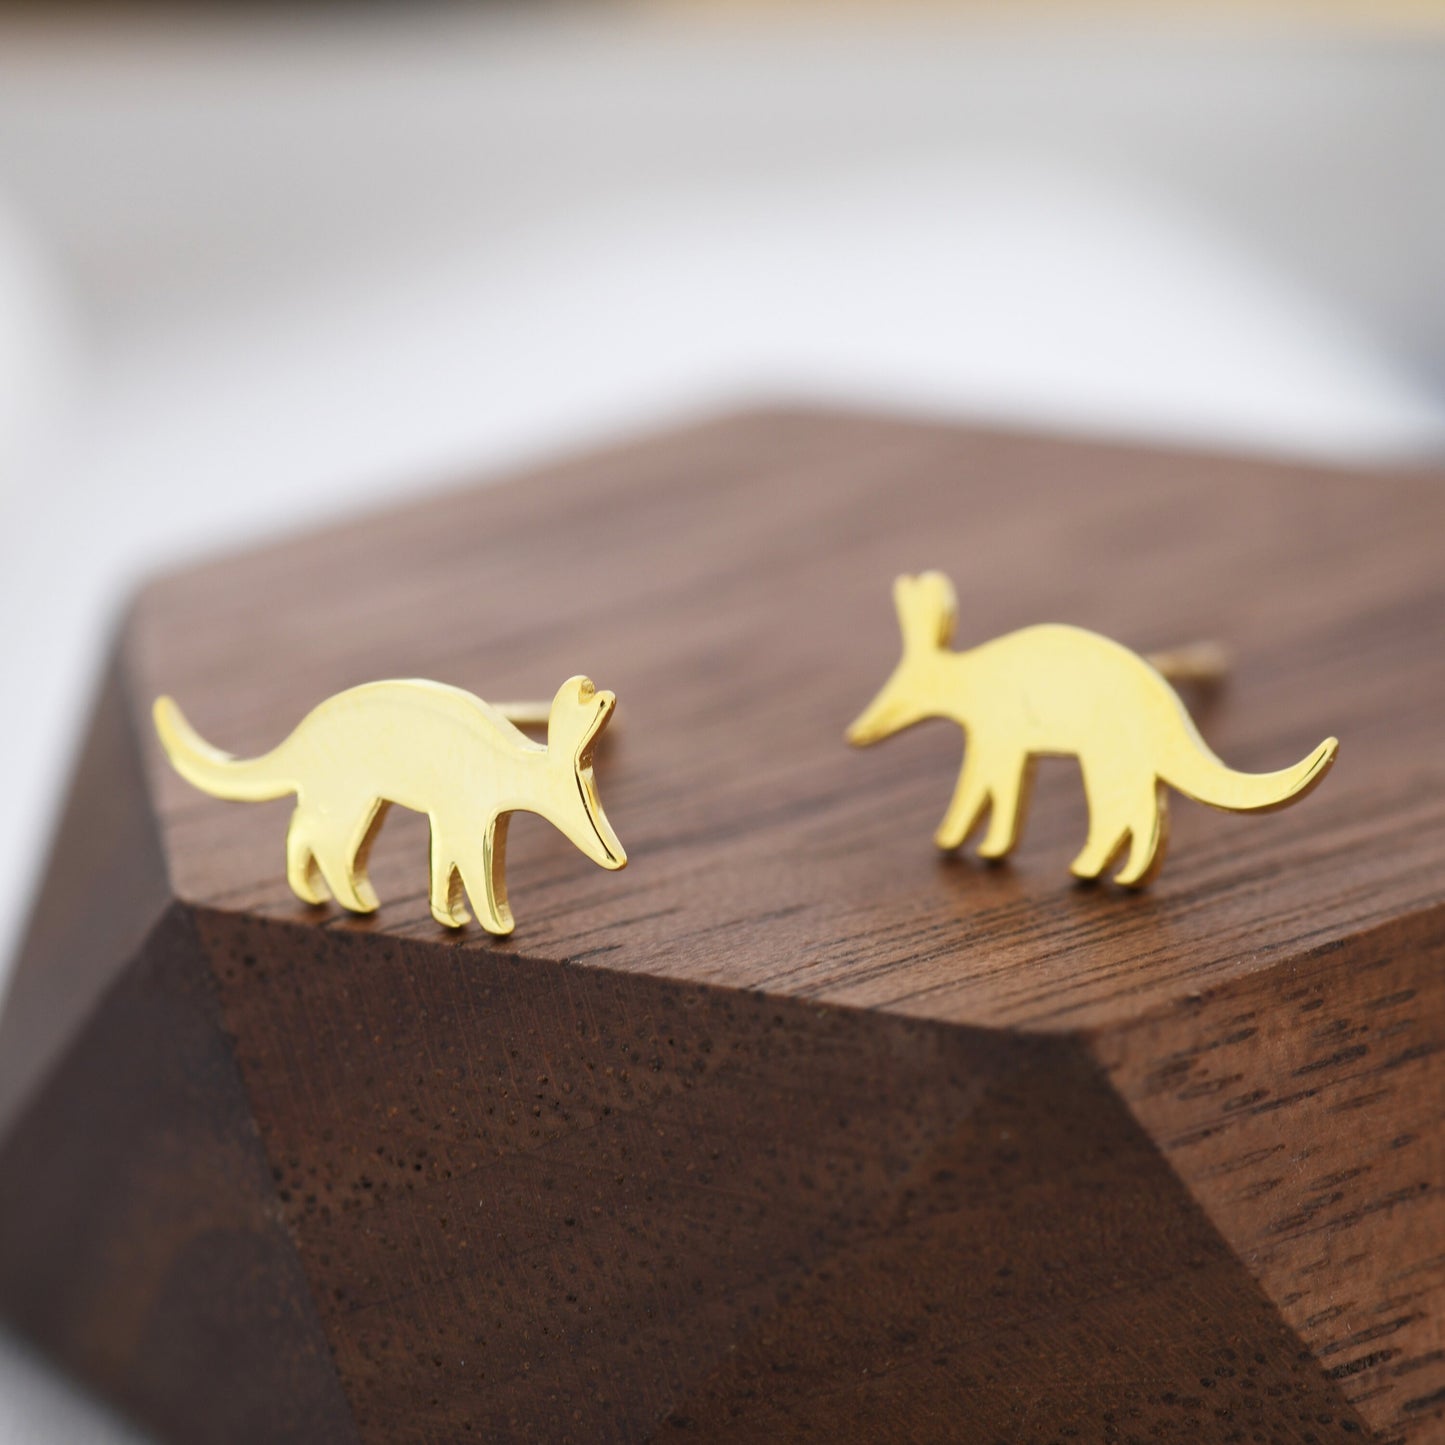 Aardvark Stud Earrings in Sterling Silver, Silver or Gold, Nature Inspired Animal Design